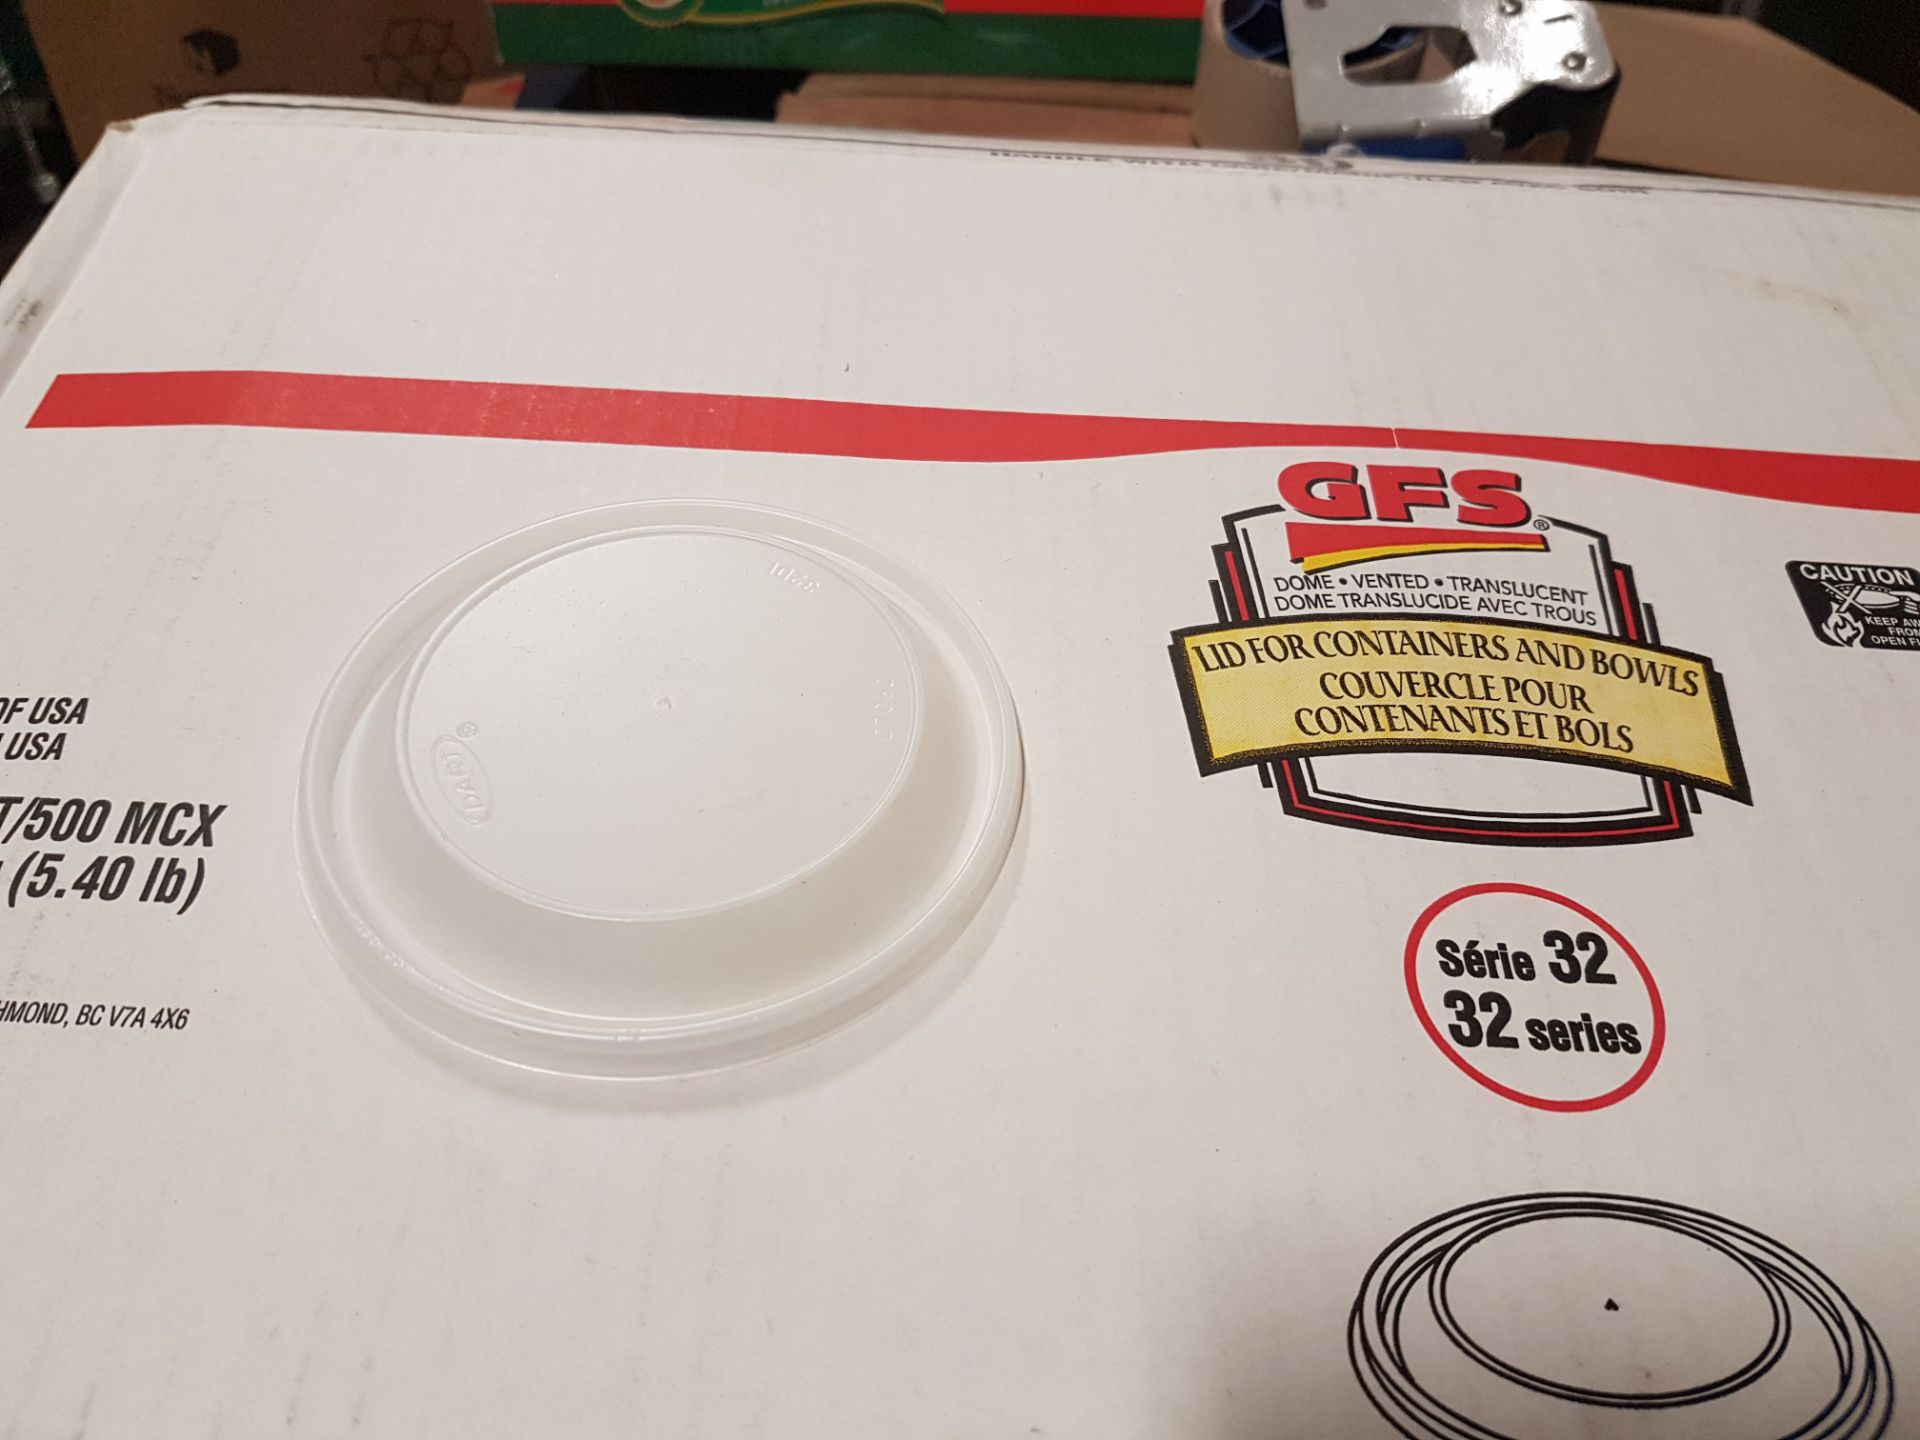 GFS Lid for Containers & Bowls (32 Series) - Case of 500